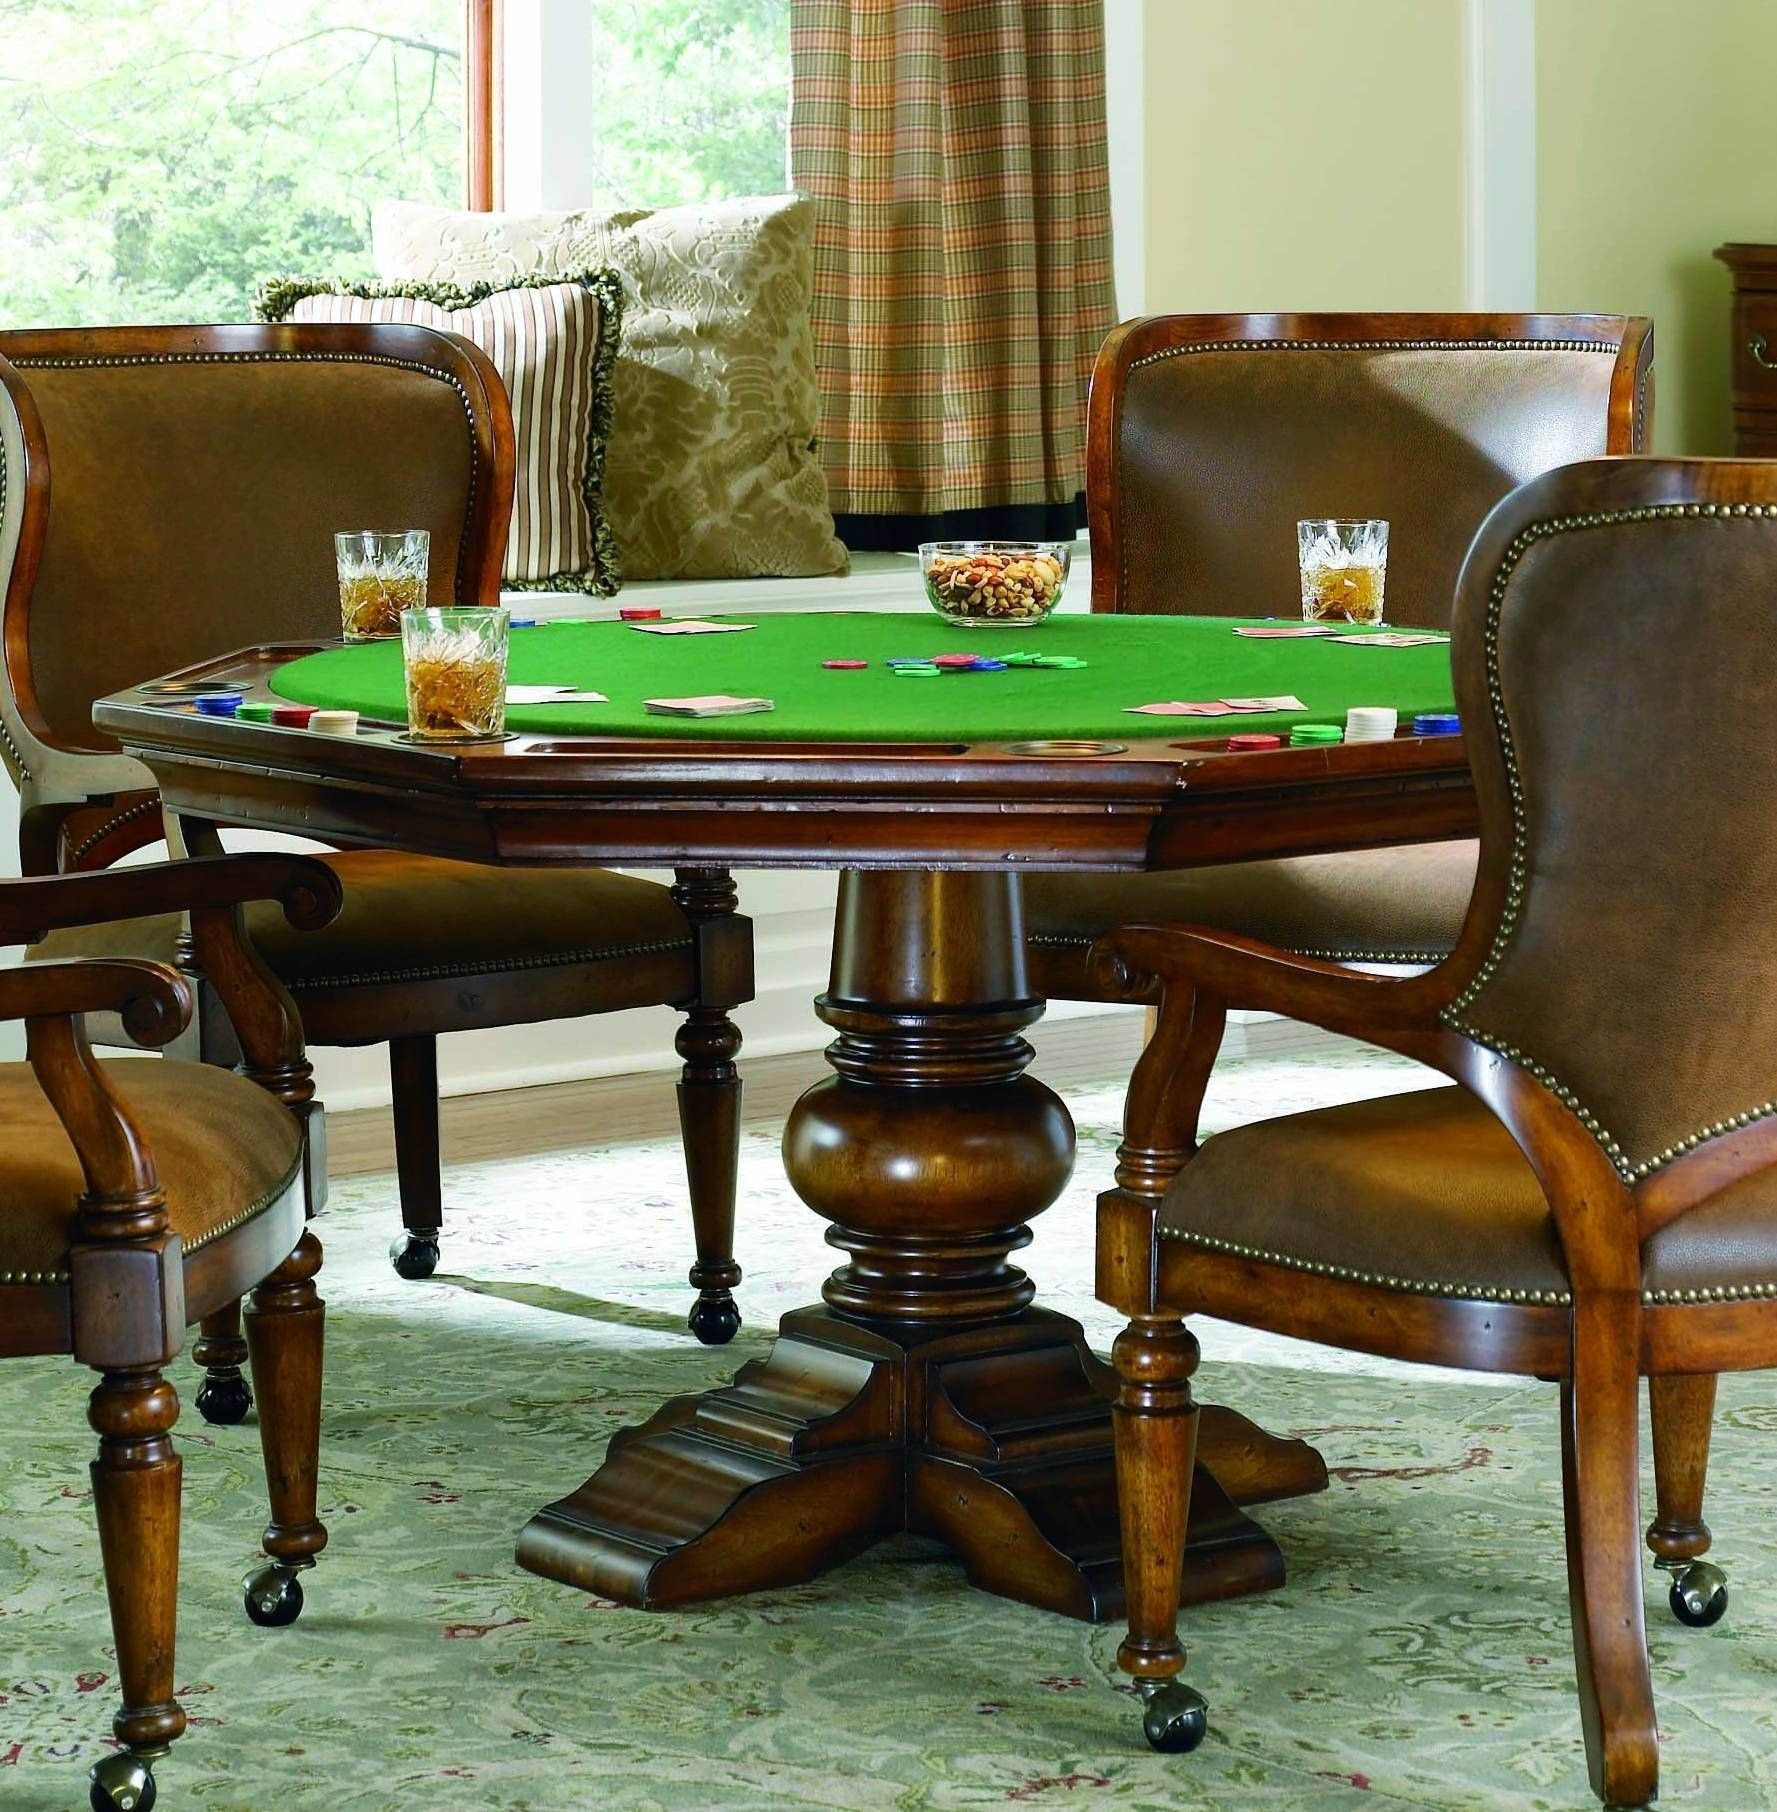 Hooker Furniture Waverly Place Reversible Top Poker Table